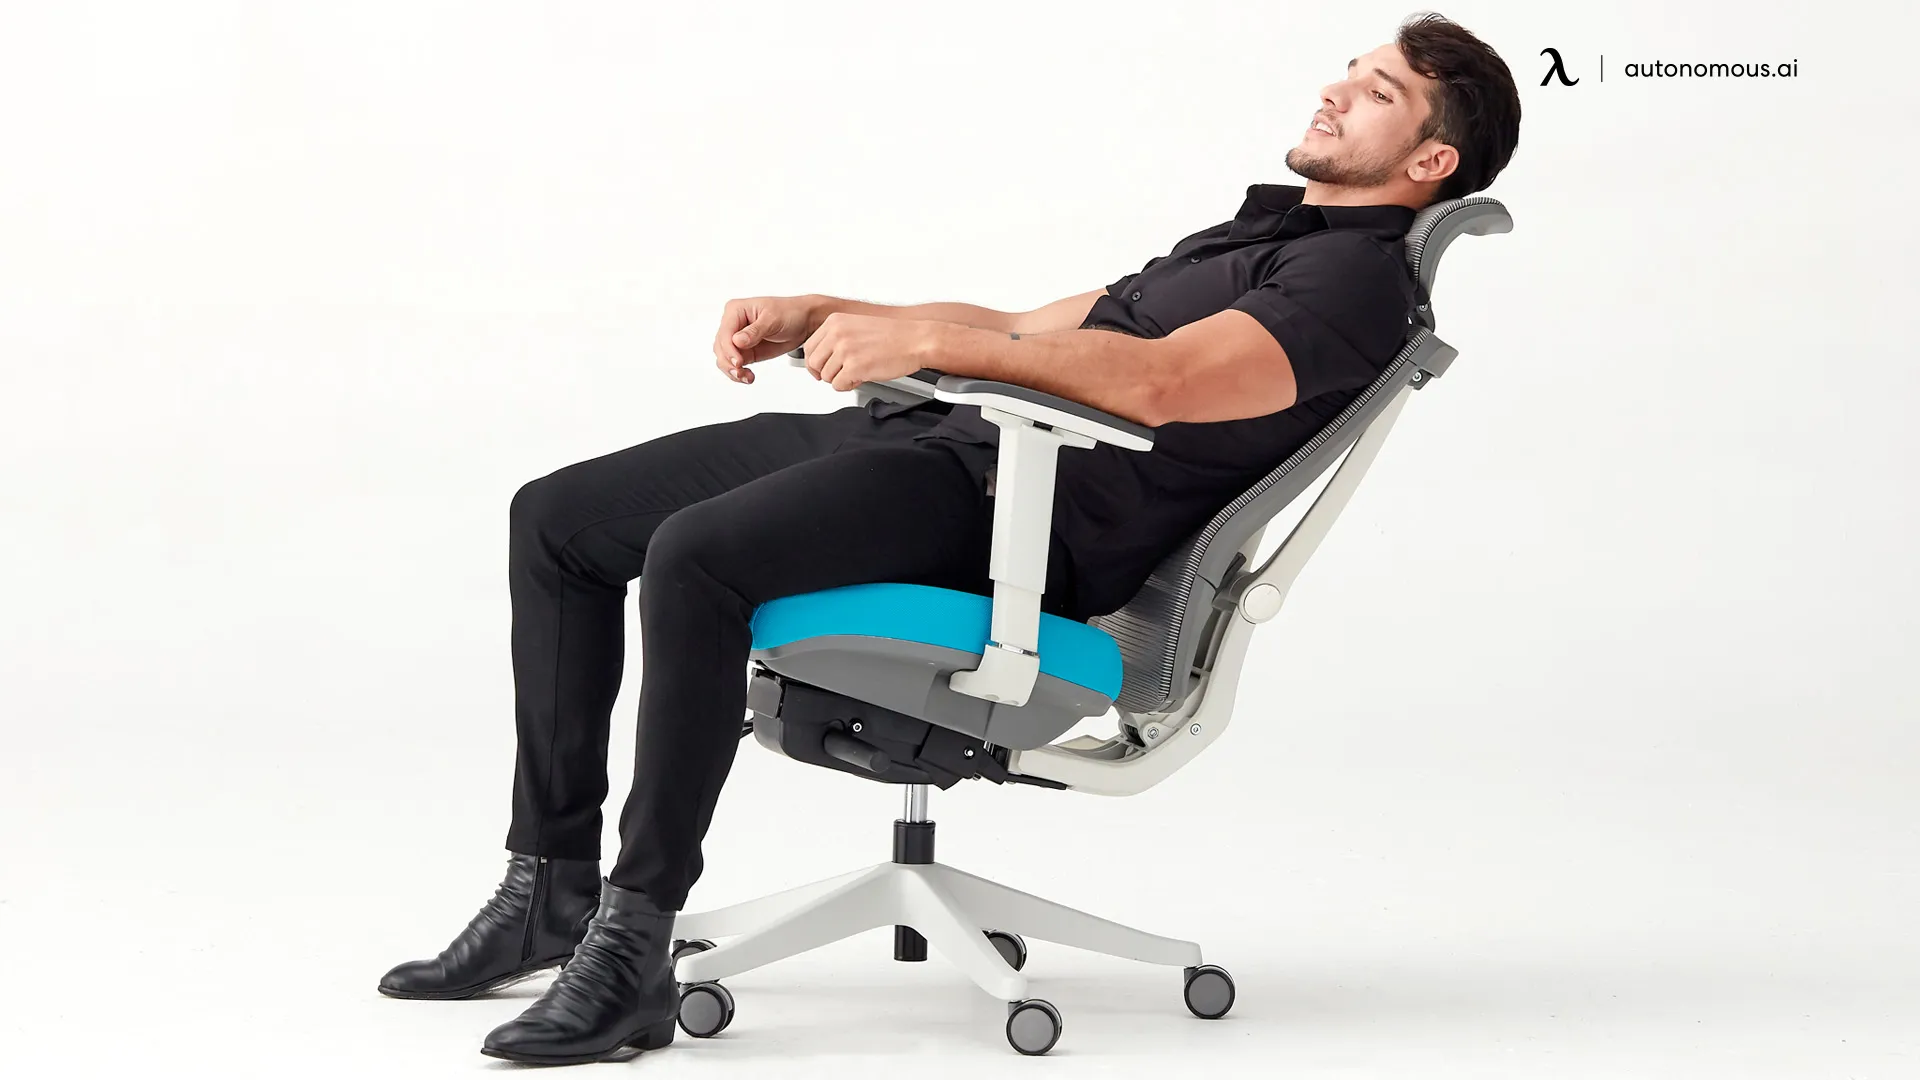 Dynamic Sitting Features for Enhanced Comfort